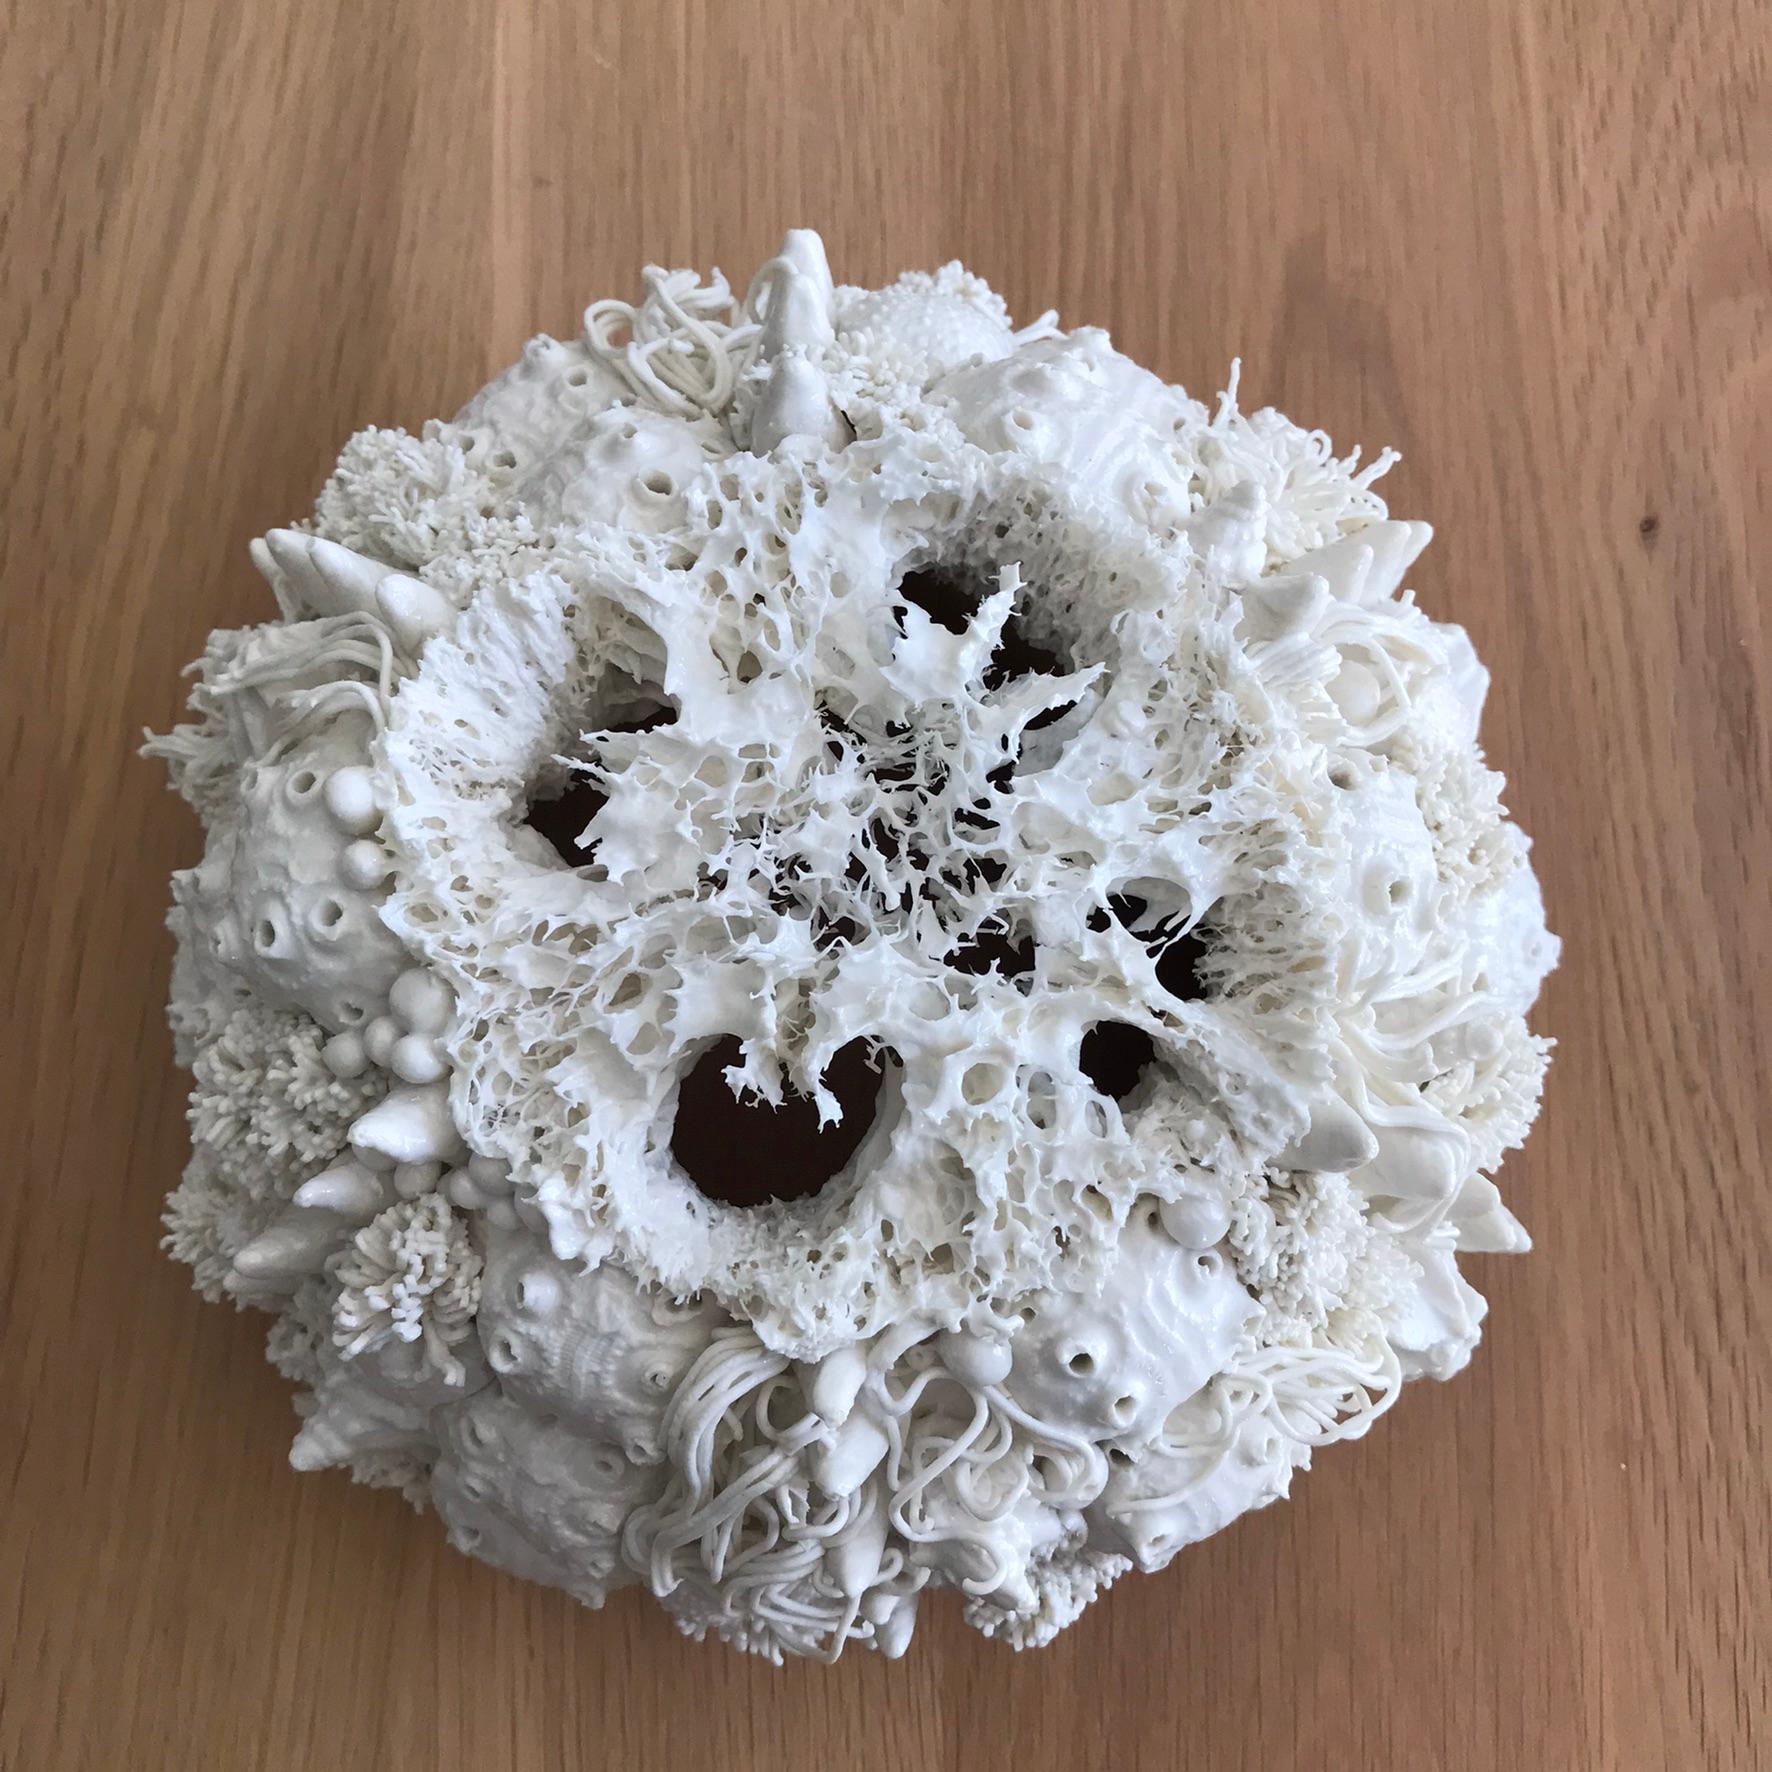 This porcelain sculpture is inspired by the fascinating and magical universe of the Abyss. An unknown and mysterious world in which even the richest imagination can still be surprised. The forms, often geometric and always so harmonious, offer an